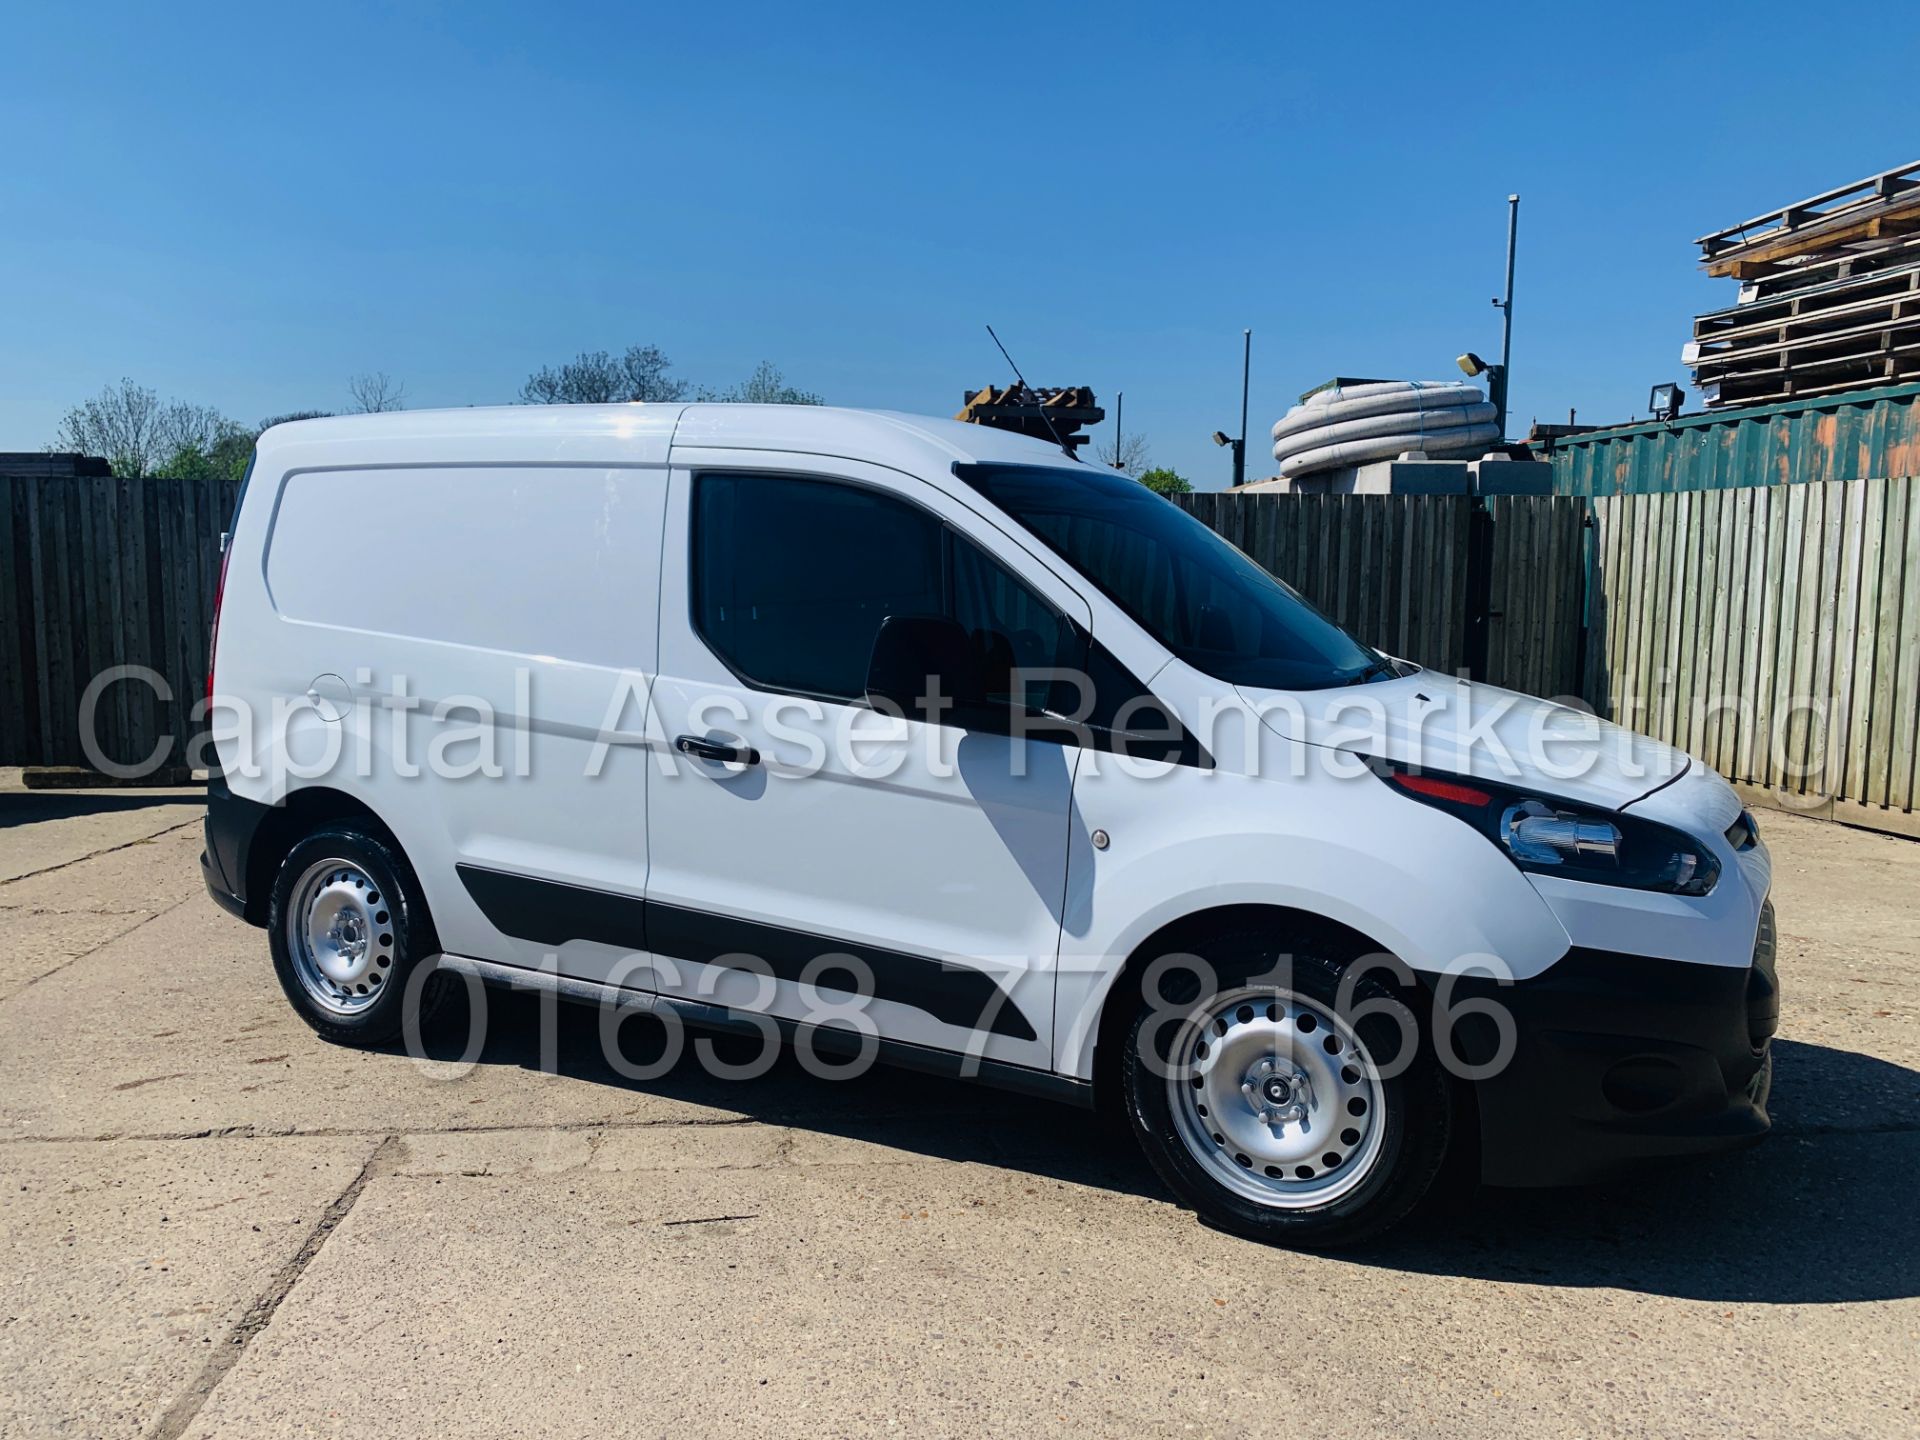 (On Sale) FORD TRANSIT CONNECT *SWB* (2017 - EURO 6) '1.5 TDCI - 6 SPEED' (1 OWNER - FULL HISTORY) - Image 11 of 38